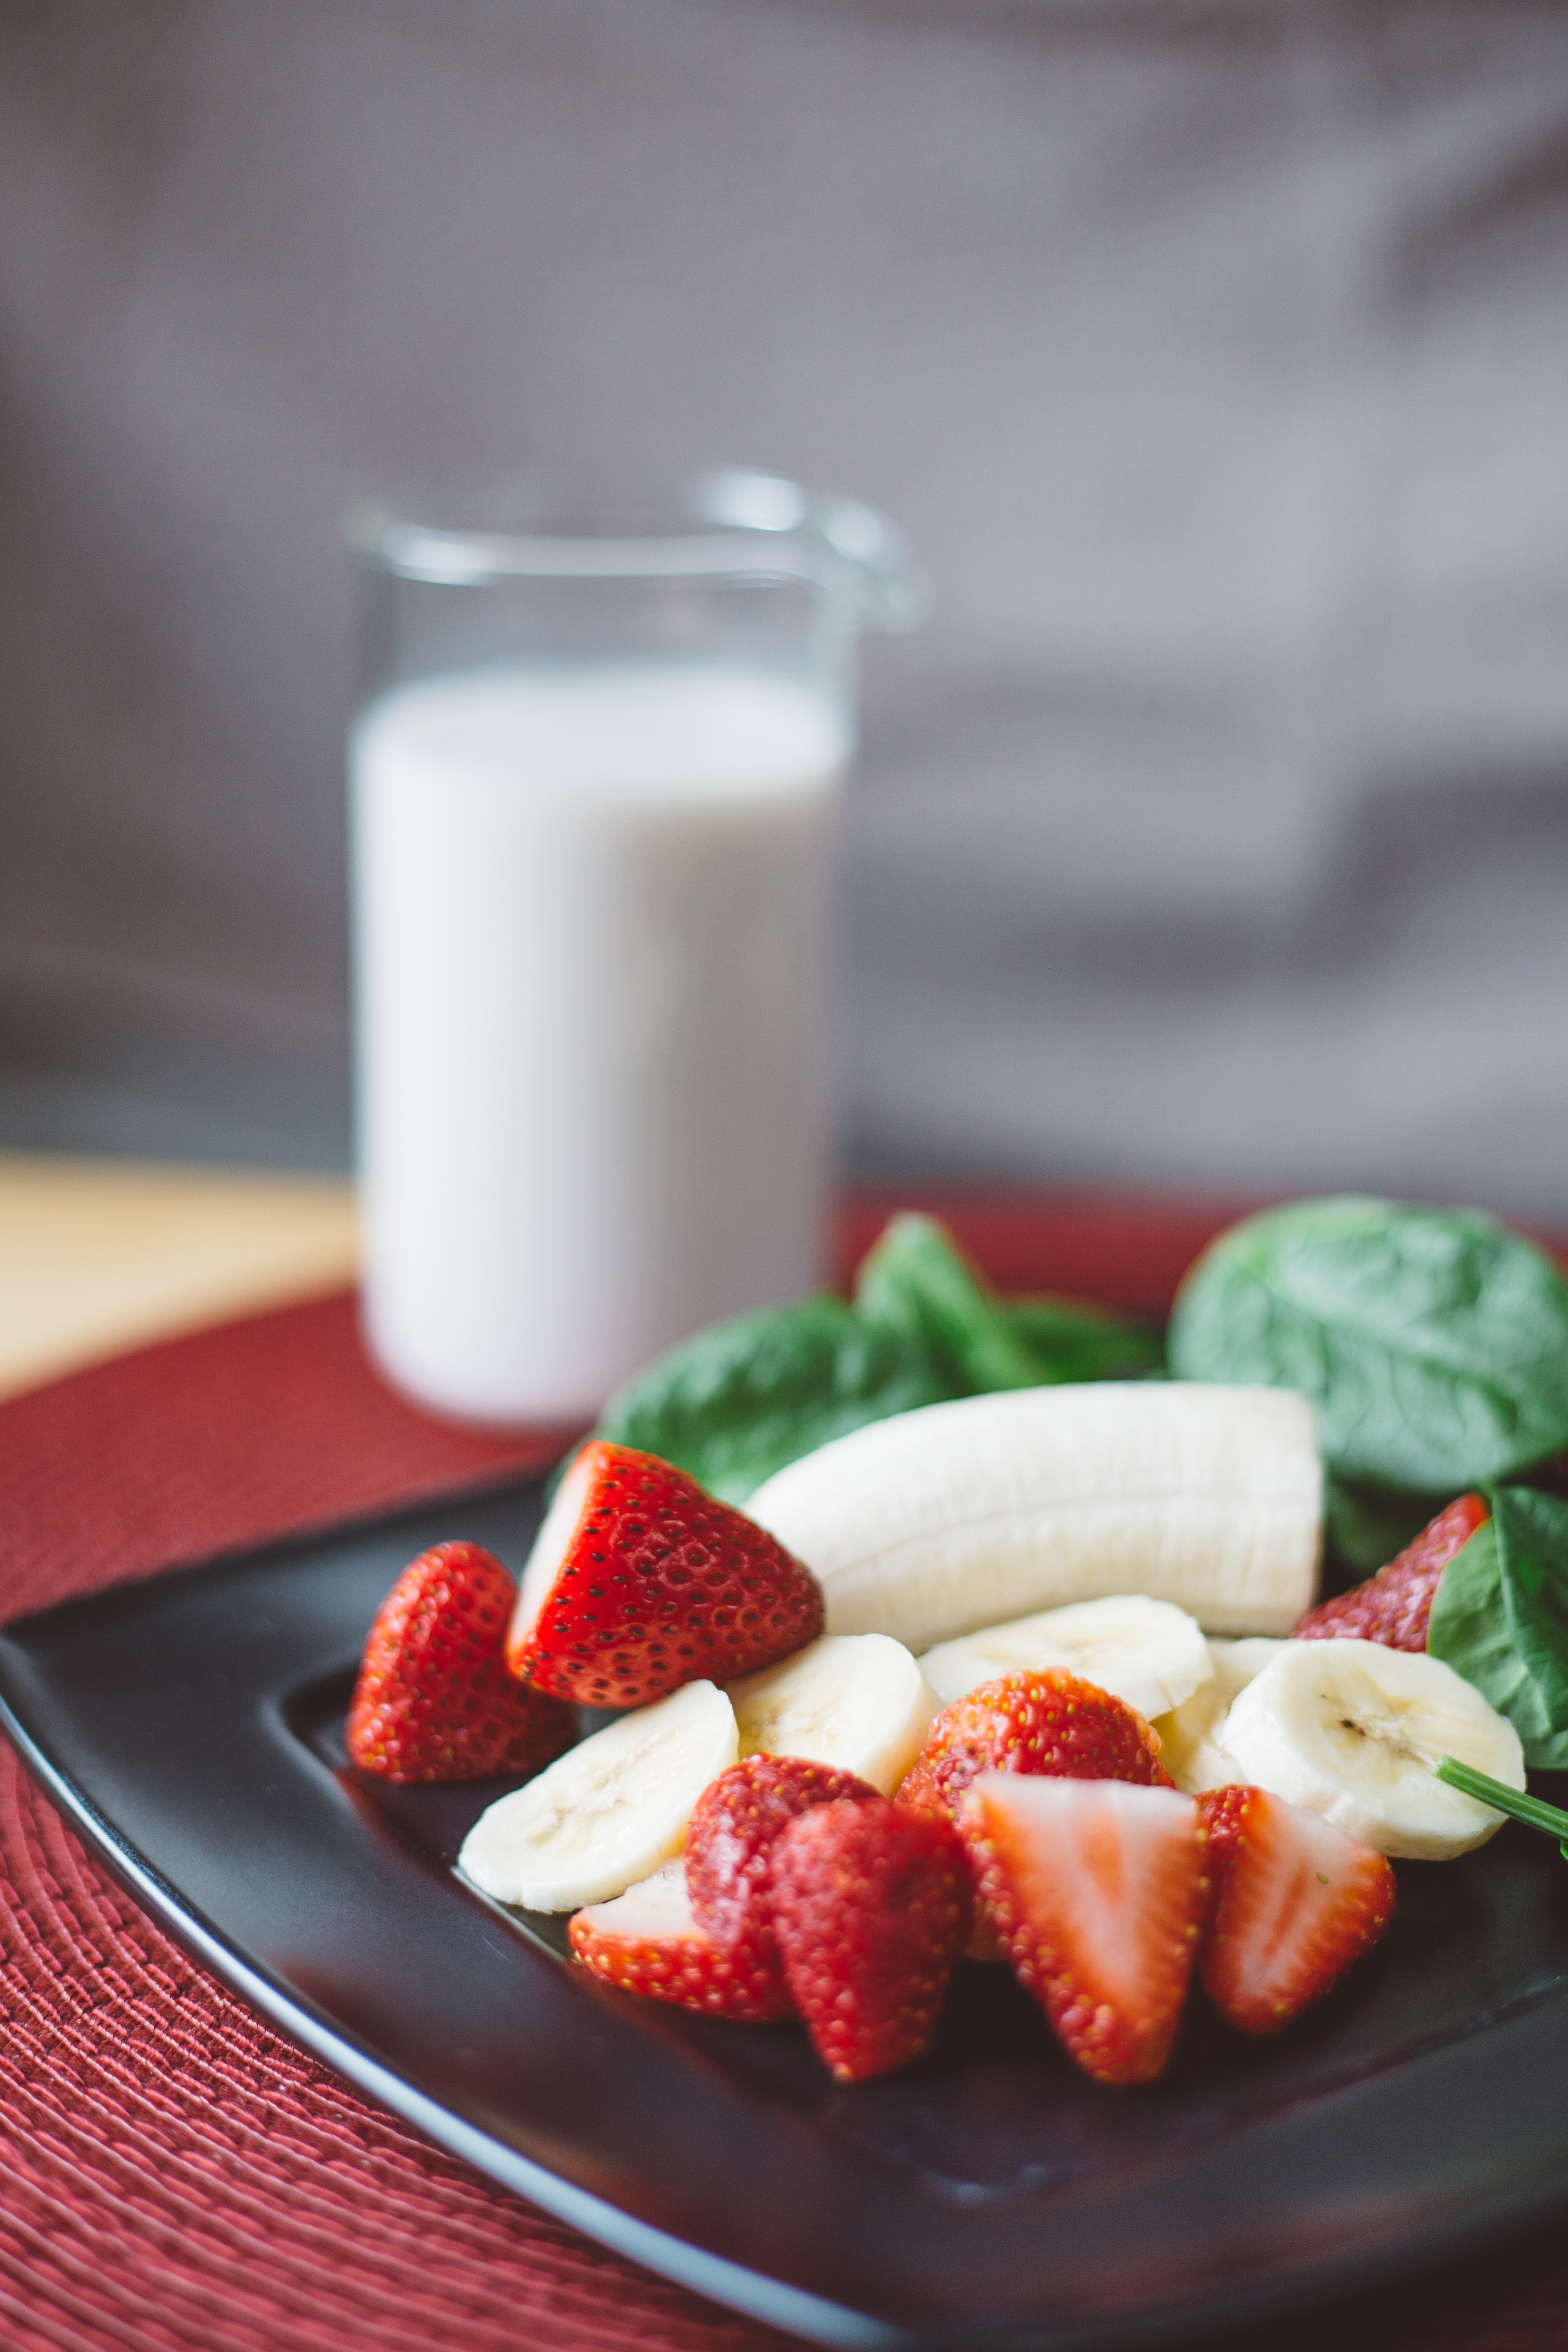 Morning Magic: Quick and Tasty Strawberry Banana Smoothie for Busy Days